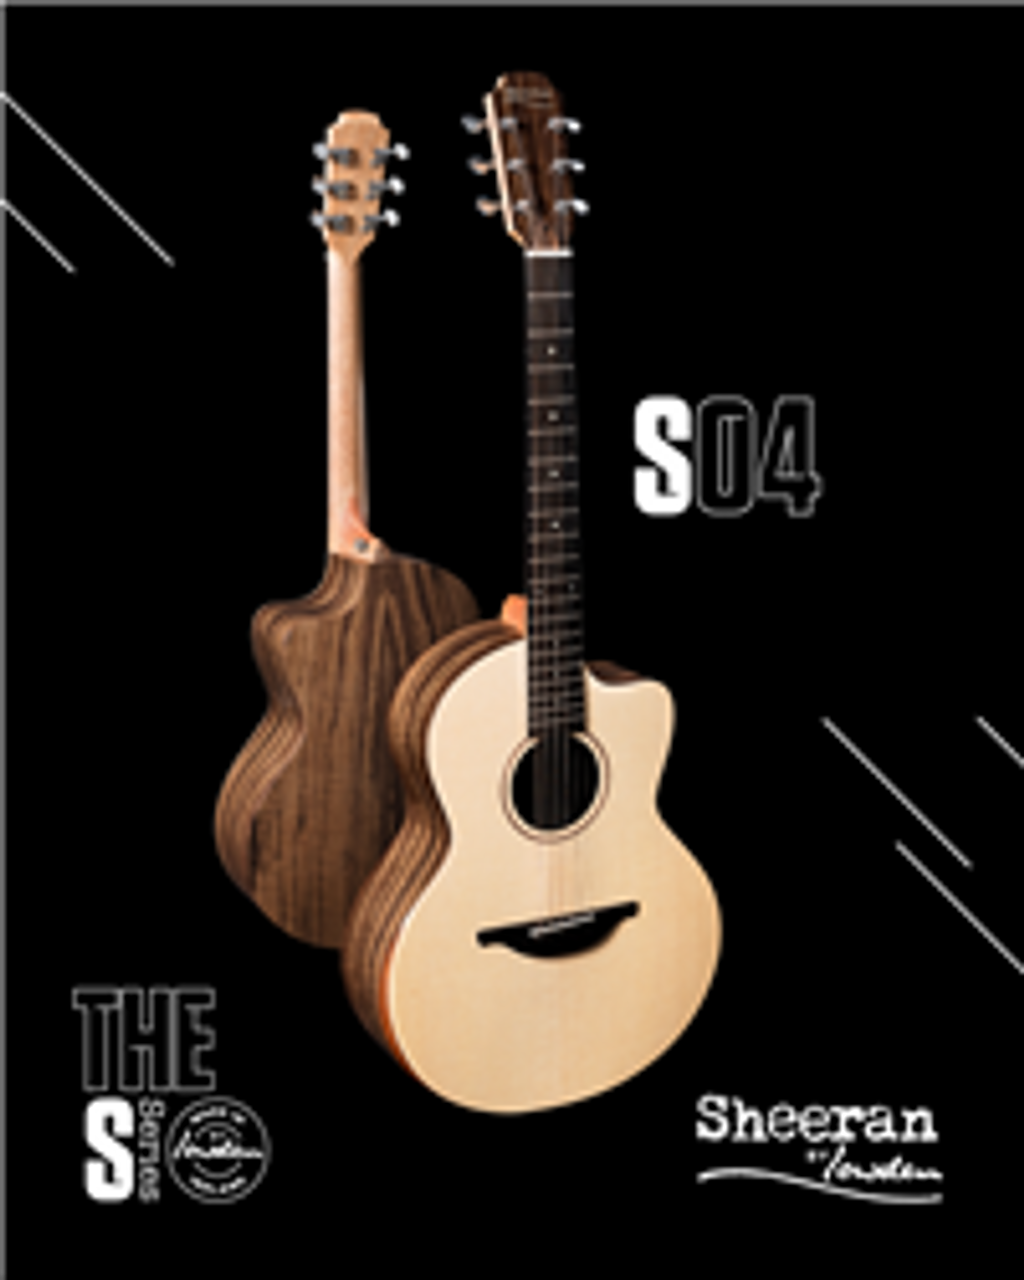 Sheeran by Lowden S-04 in Figured Walnut and Sitka Spruce